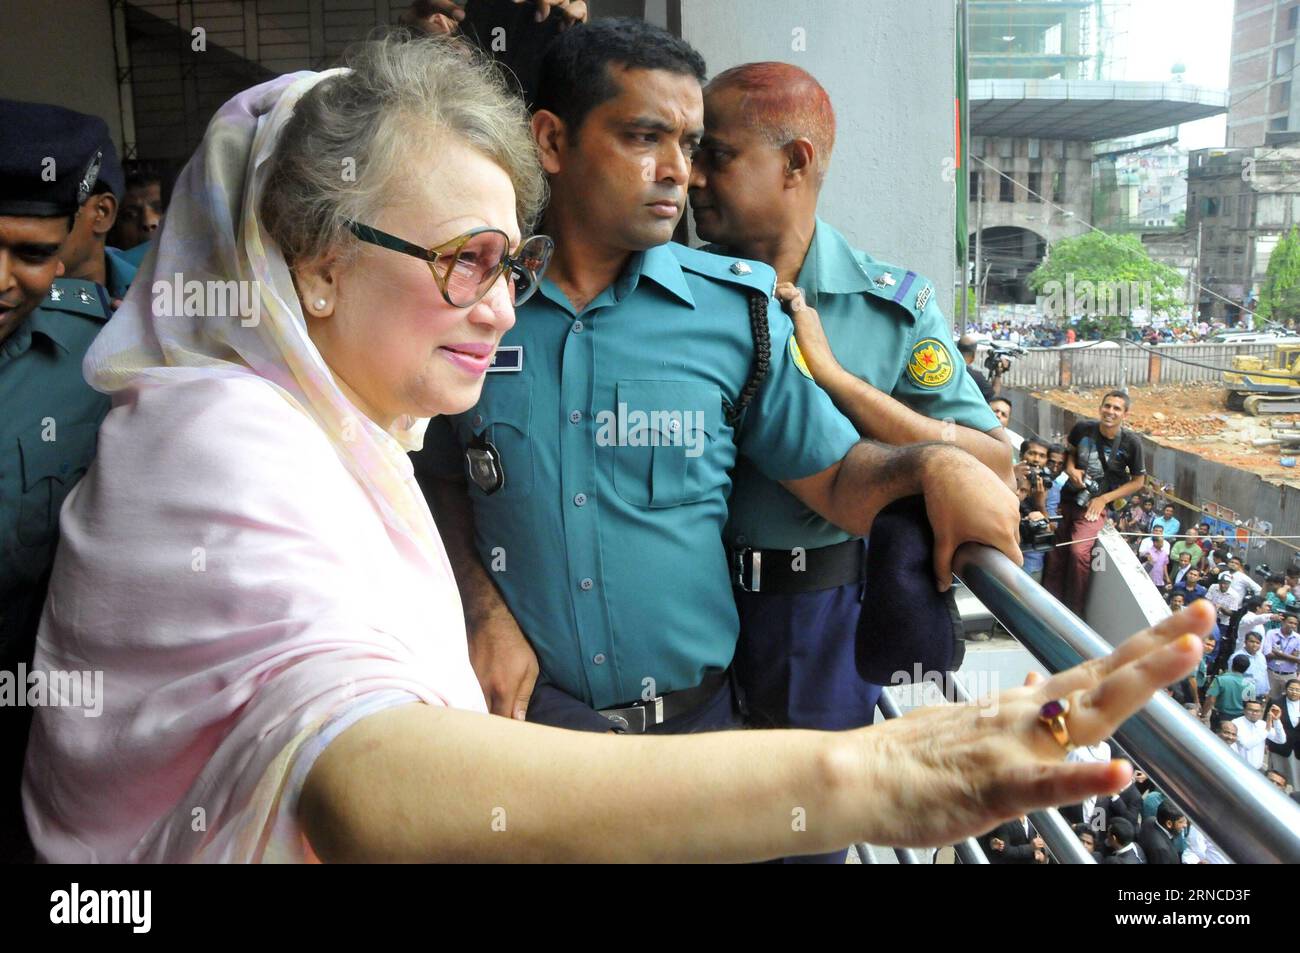 (160405) -- DHAKA, April 5, 2016 -- Bangladesh s former Prime Minister and Bangladesh Nationalist Party Chairperson Khaleda Zia (front) waves to supporters after being granted bail at a court in Dhaka, Bangladesh, April 5, 2016. Bangladesh s former Prime Minister Khaleda Zia was granted bail in five graft, violence and sedition cases on Tuesday. ) BANGLADESH-DHAKA-FORMER PM-BAIL SharifulxIslam PUBLICATIONxNOTxINxCHN   Dhaka April 5 2016 Bangladesh S Former Prime Ministers and Bangladesh Nationalist Party Chair person Khaleda Zia Front Waves to Supporters After Being granted Bail AT a Court in Stock Photo